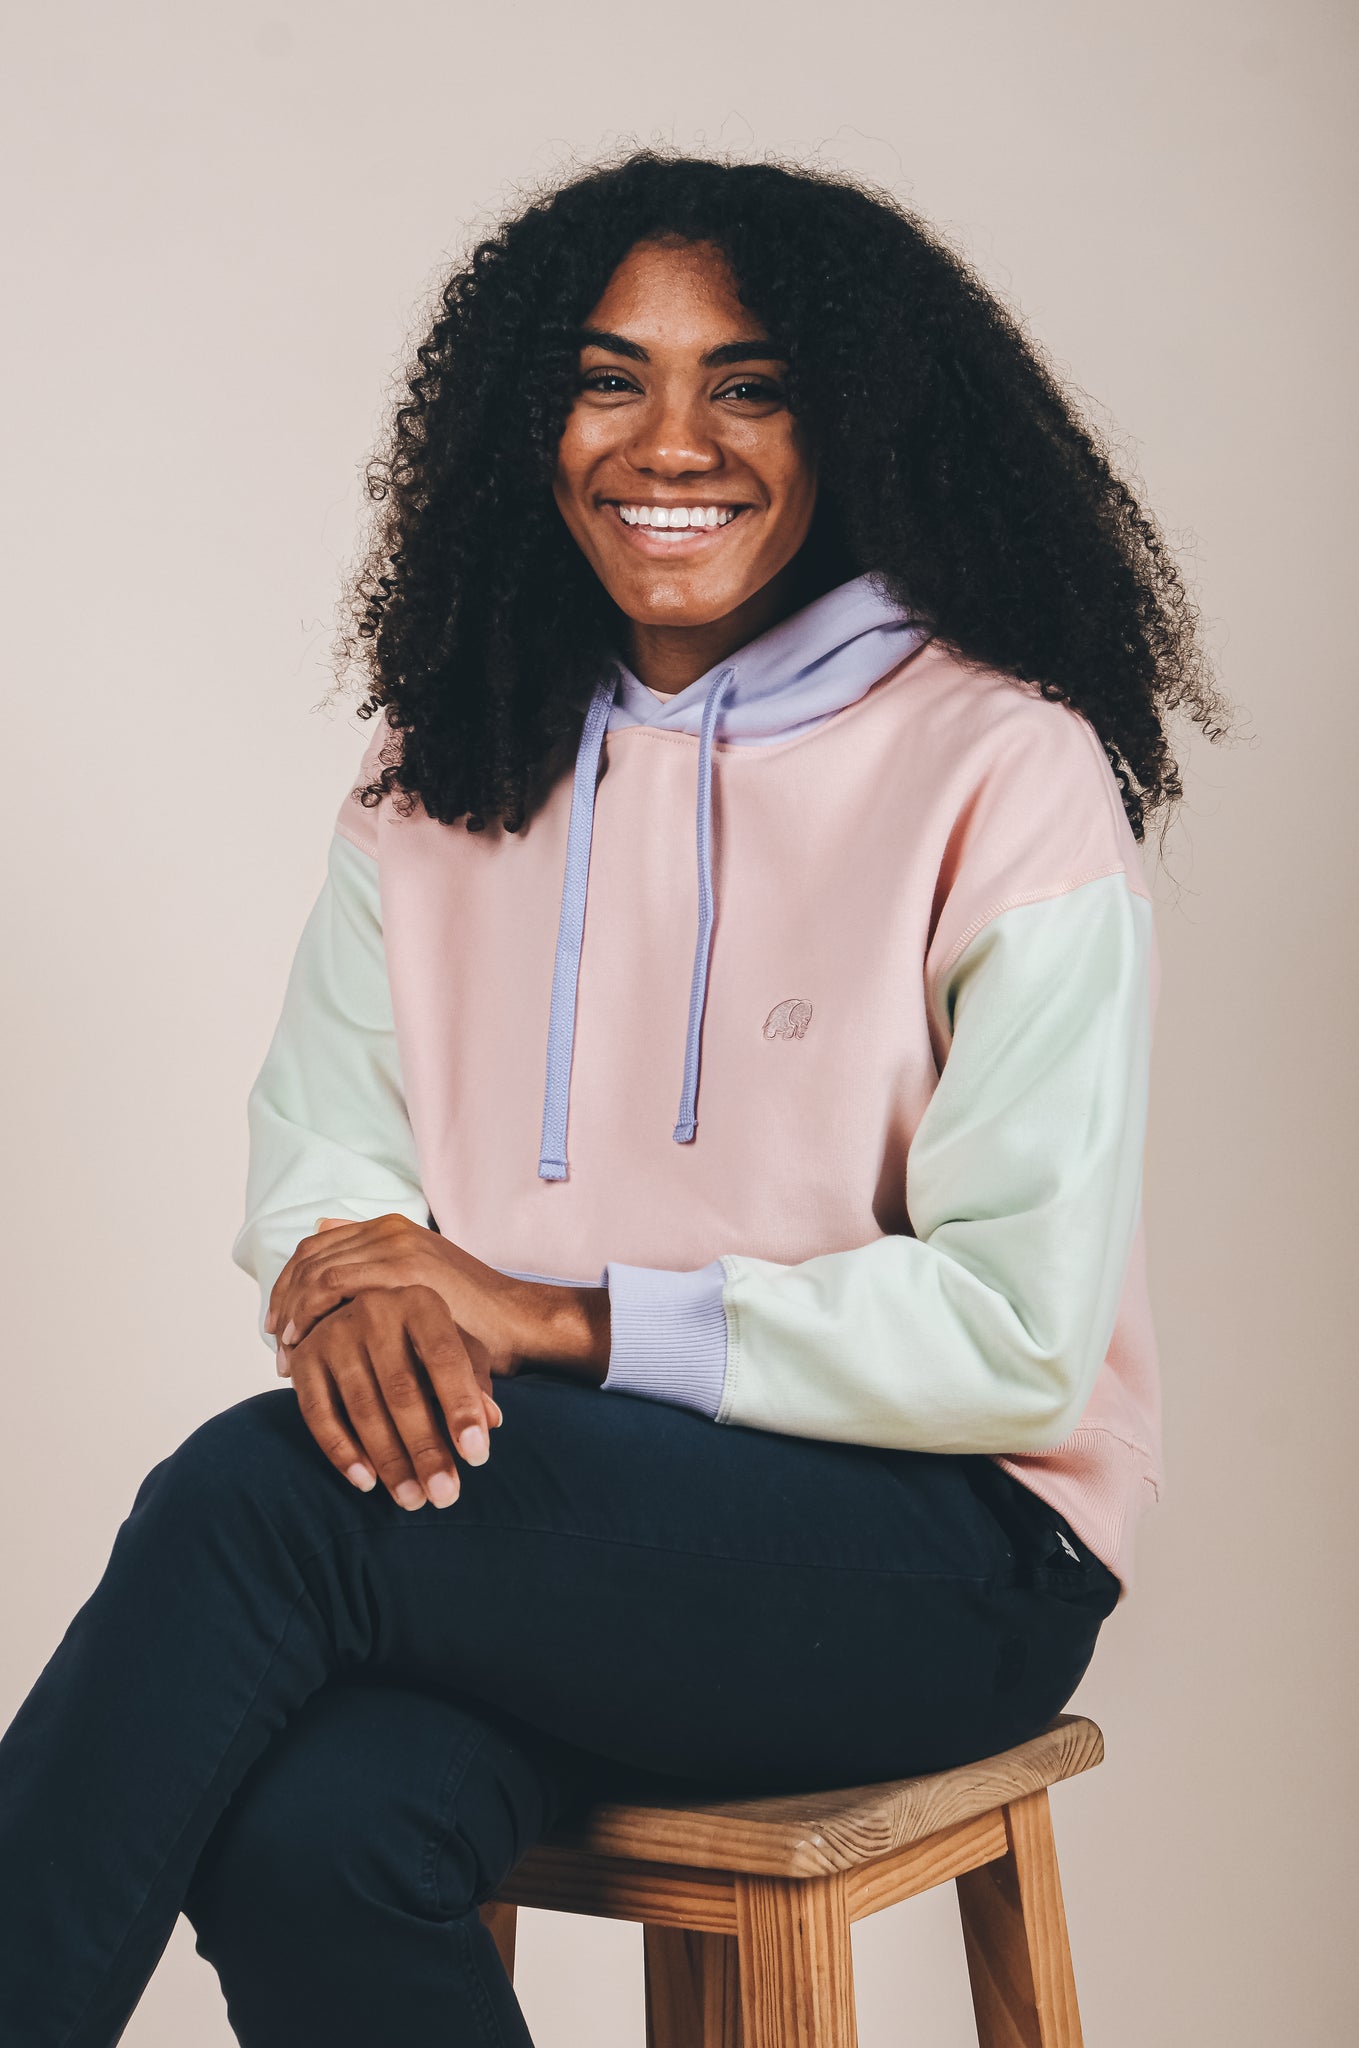 Sudadera Capucha Mujer Oversized Orgánica Esencial Pink